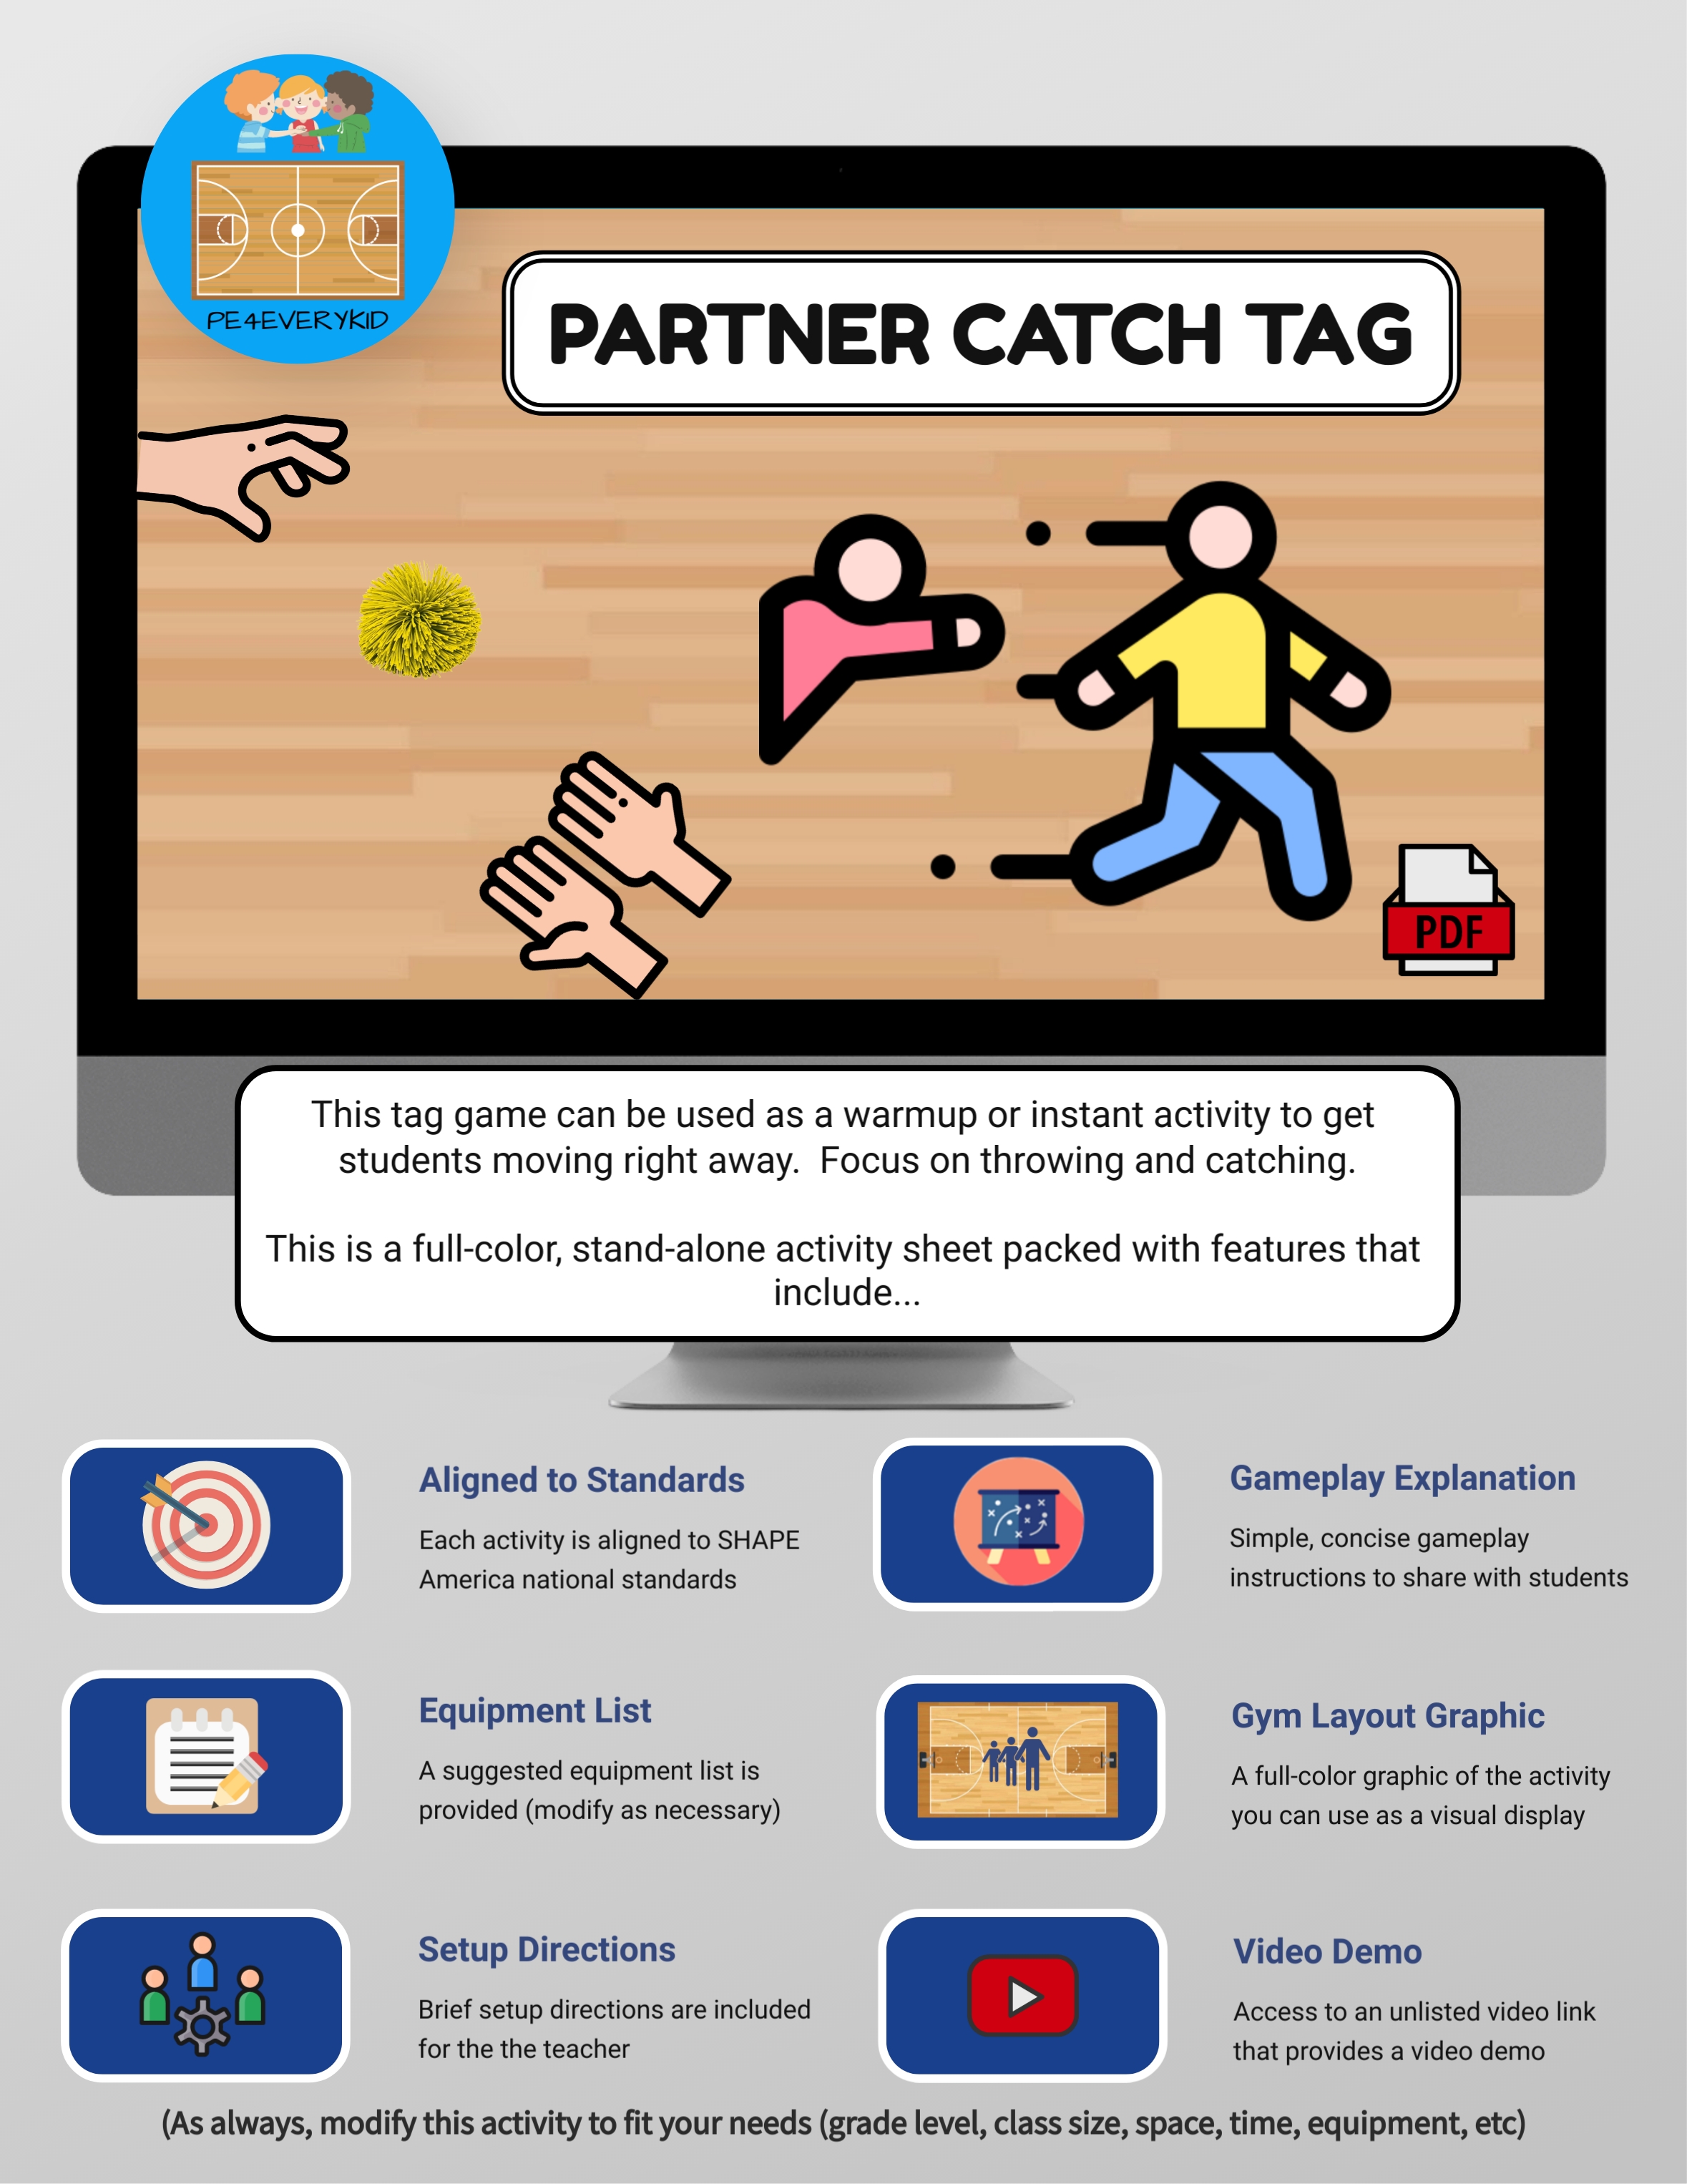 Tag Games - Hot Dog Tag For Elementary PE!